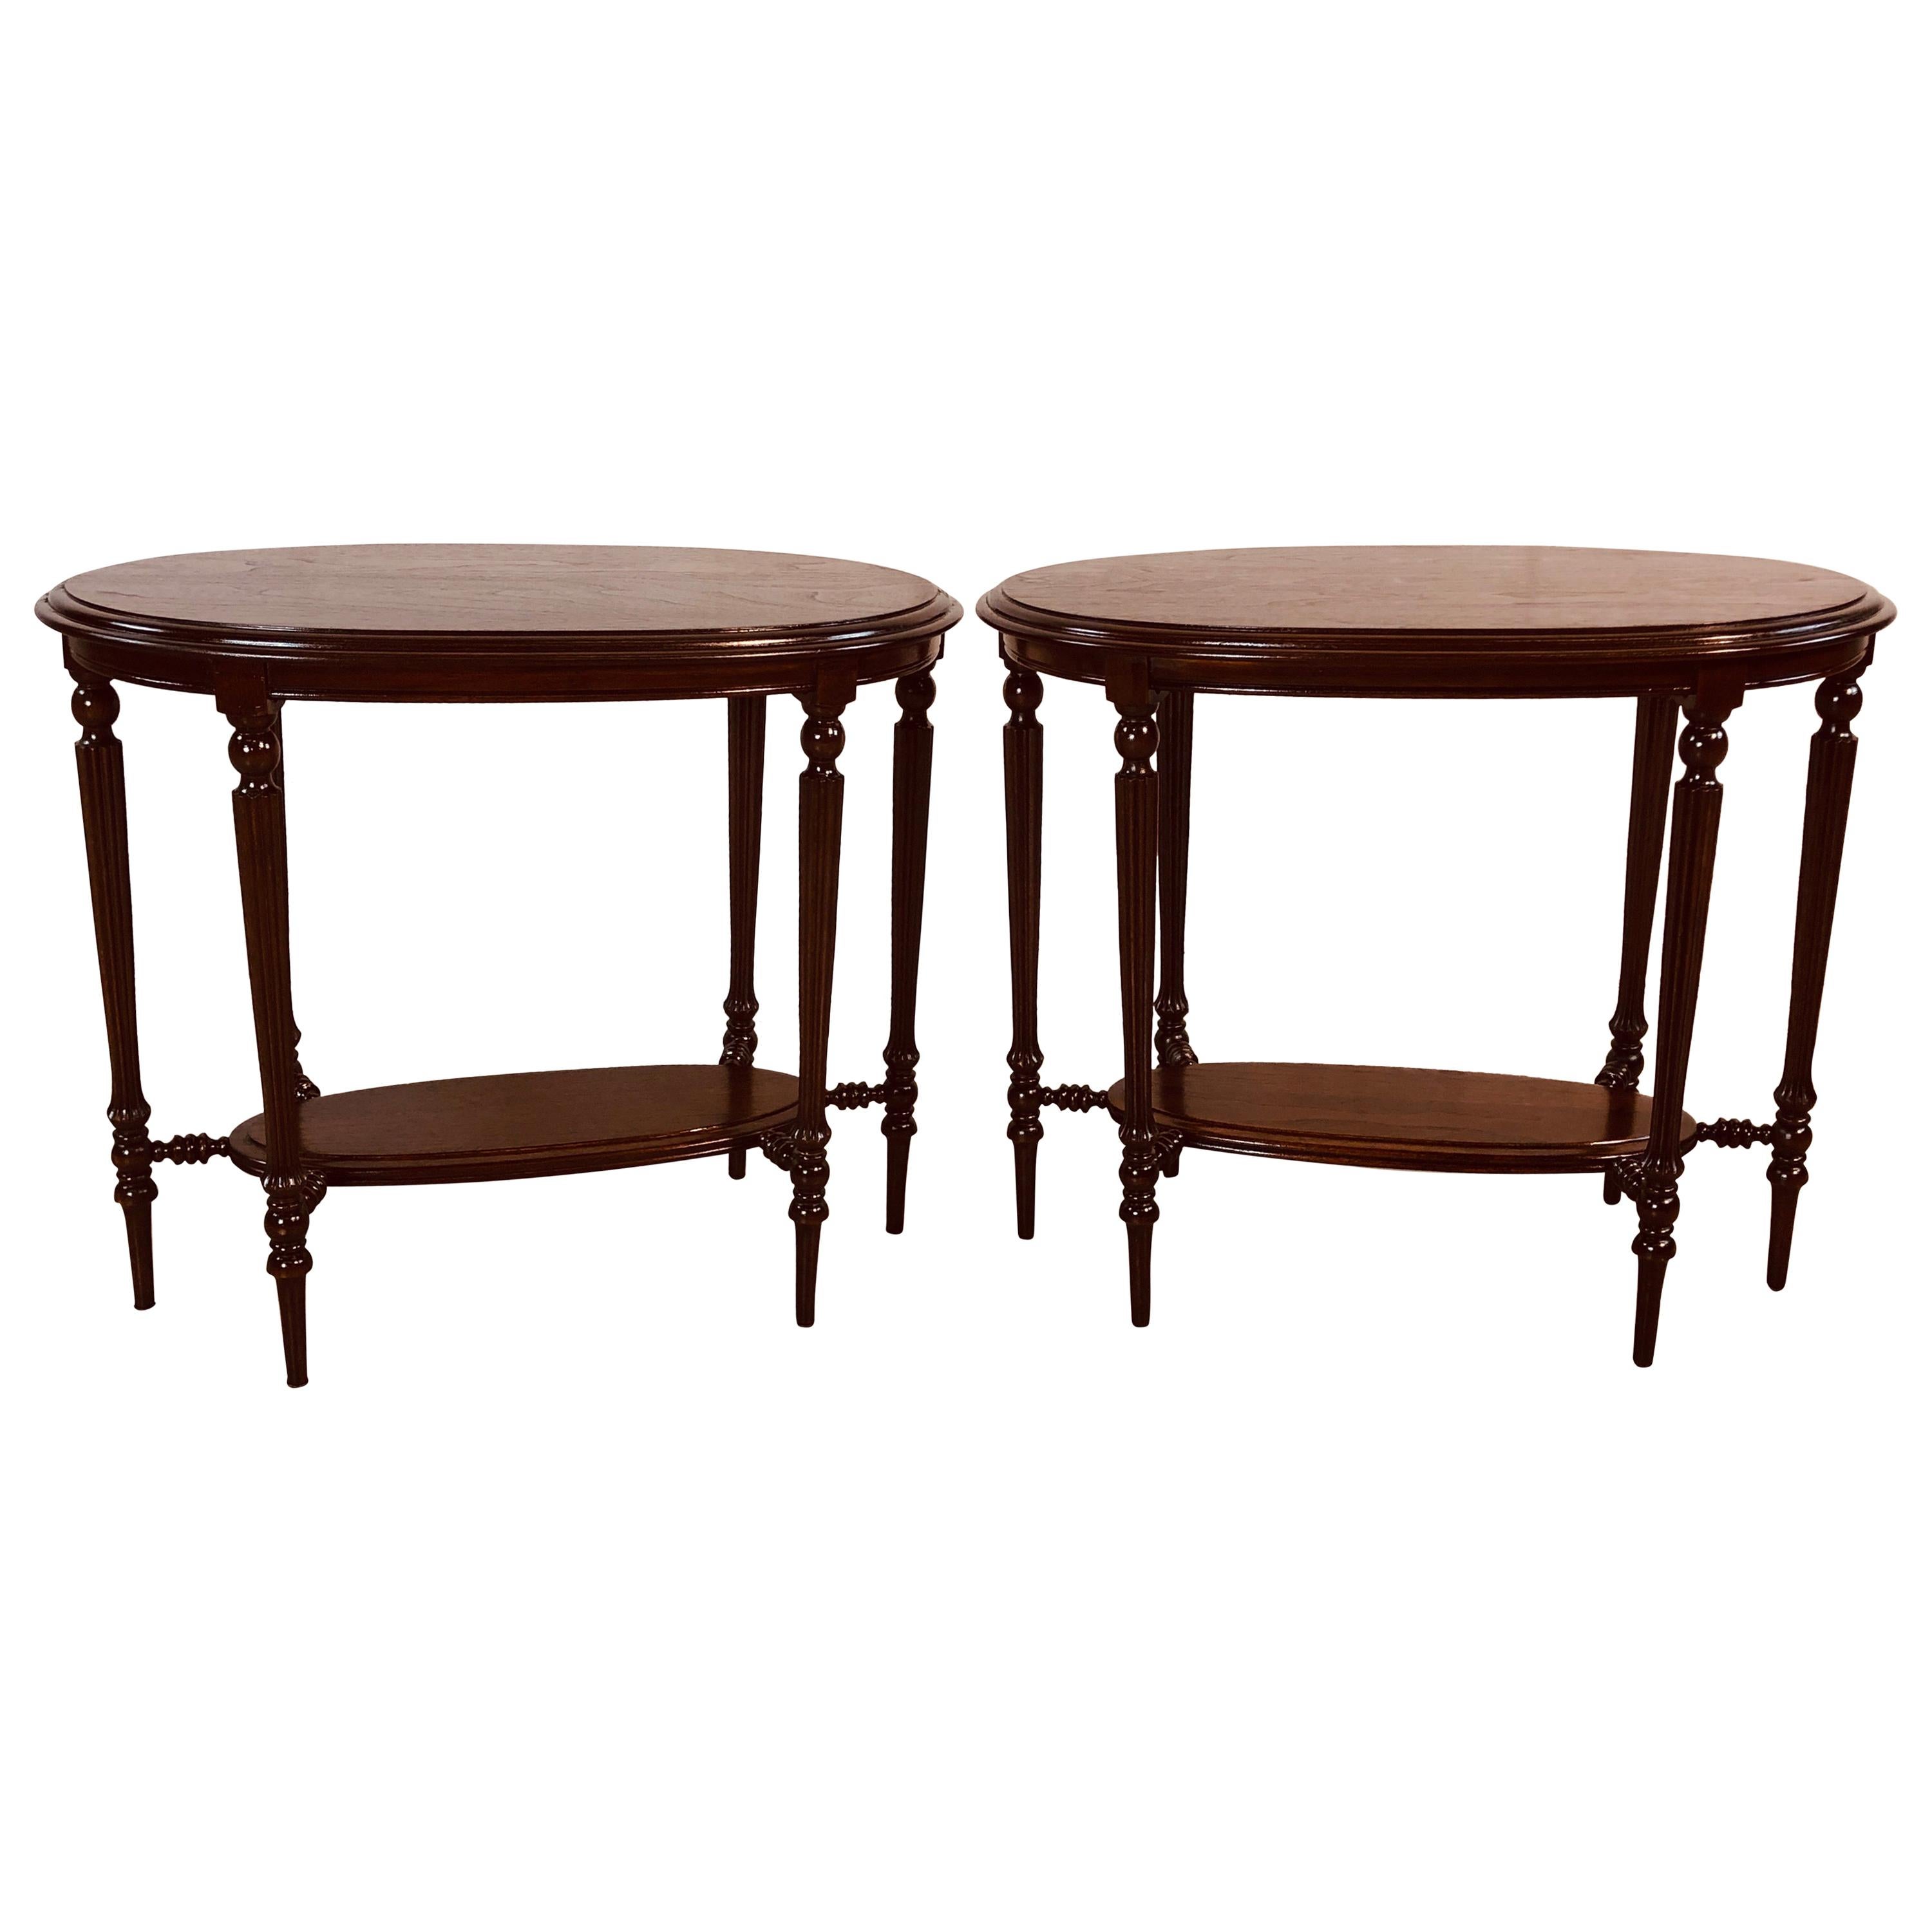 Late Victorian Walnut Oval Side Tables, Pair For Sale